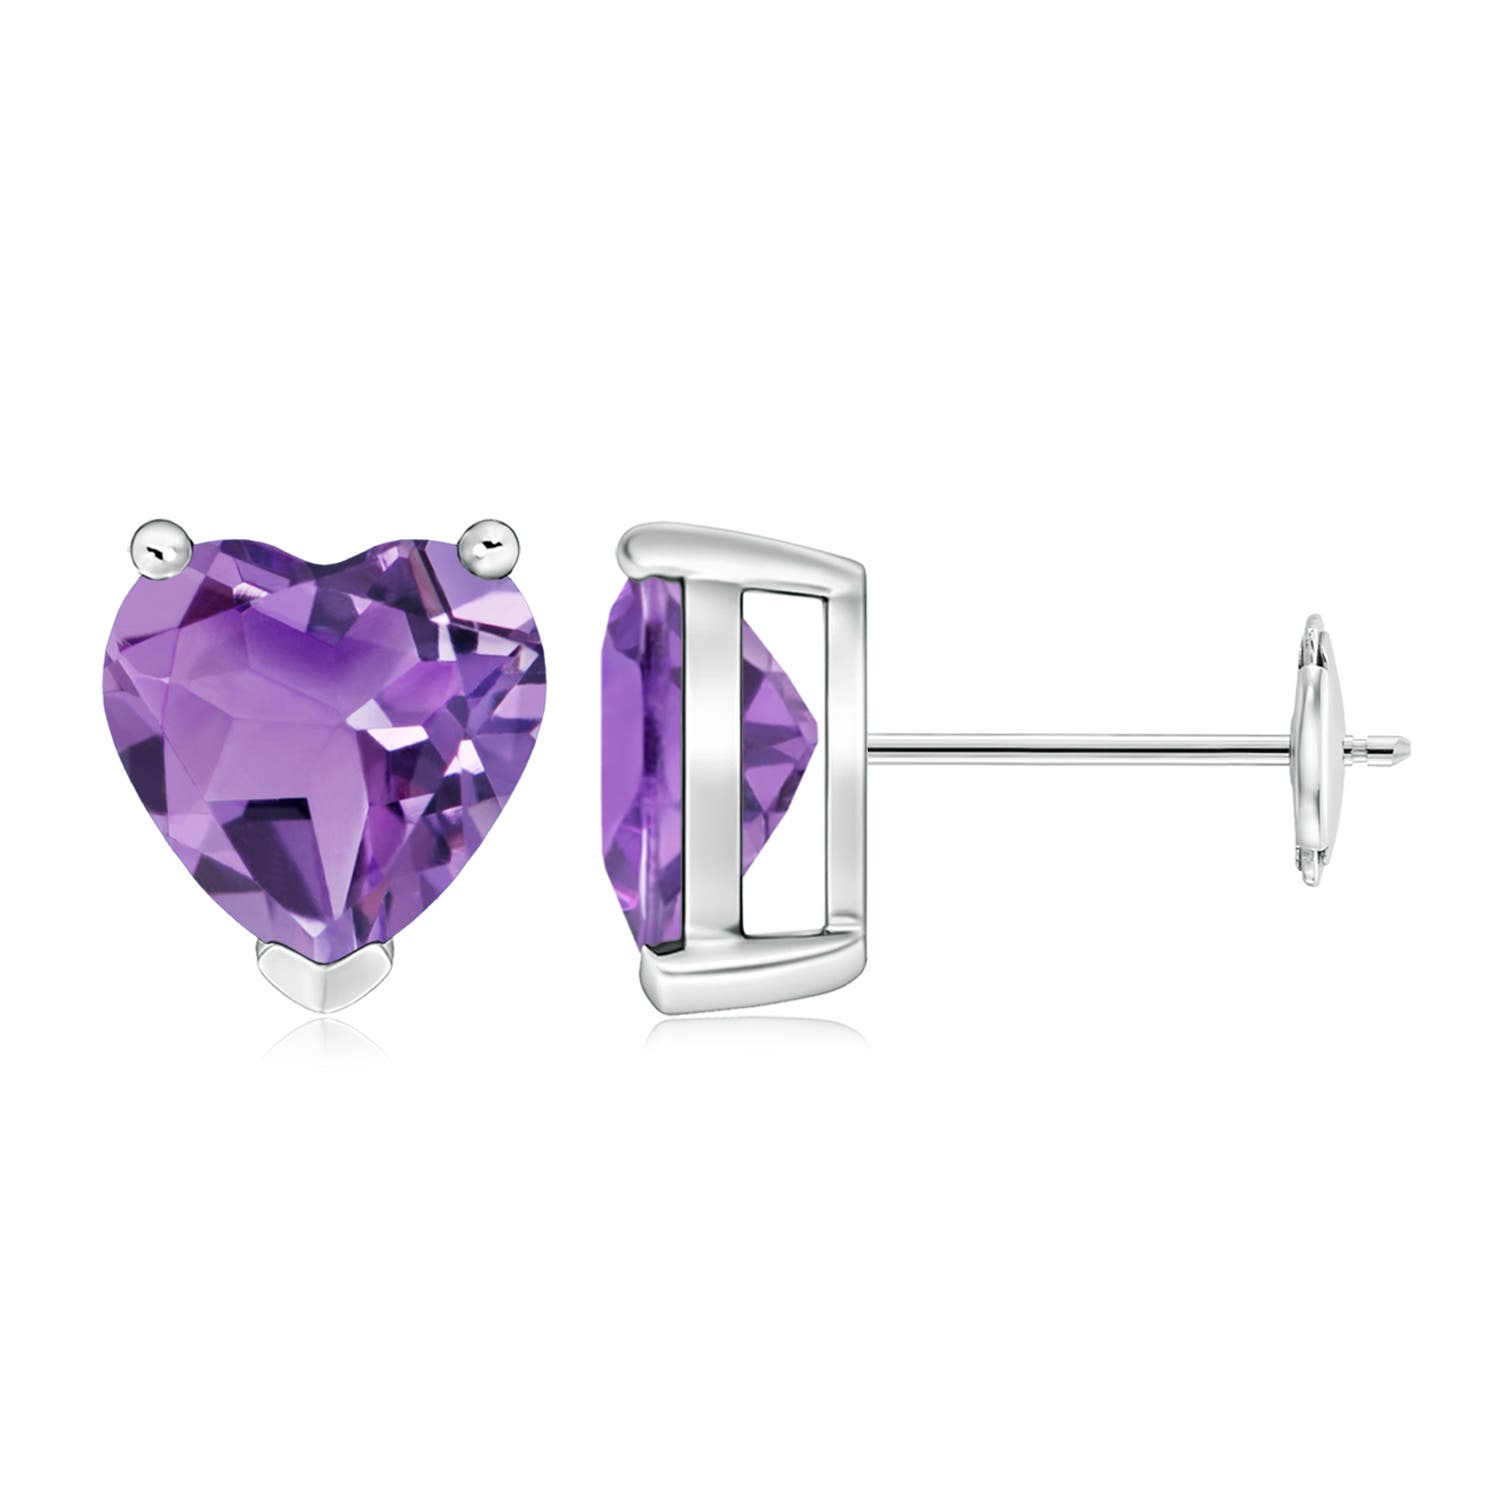 A - Amethyst / 3 CT / 14 KT White Gold